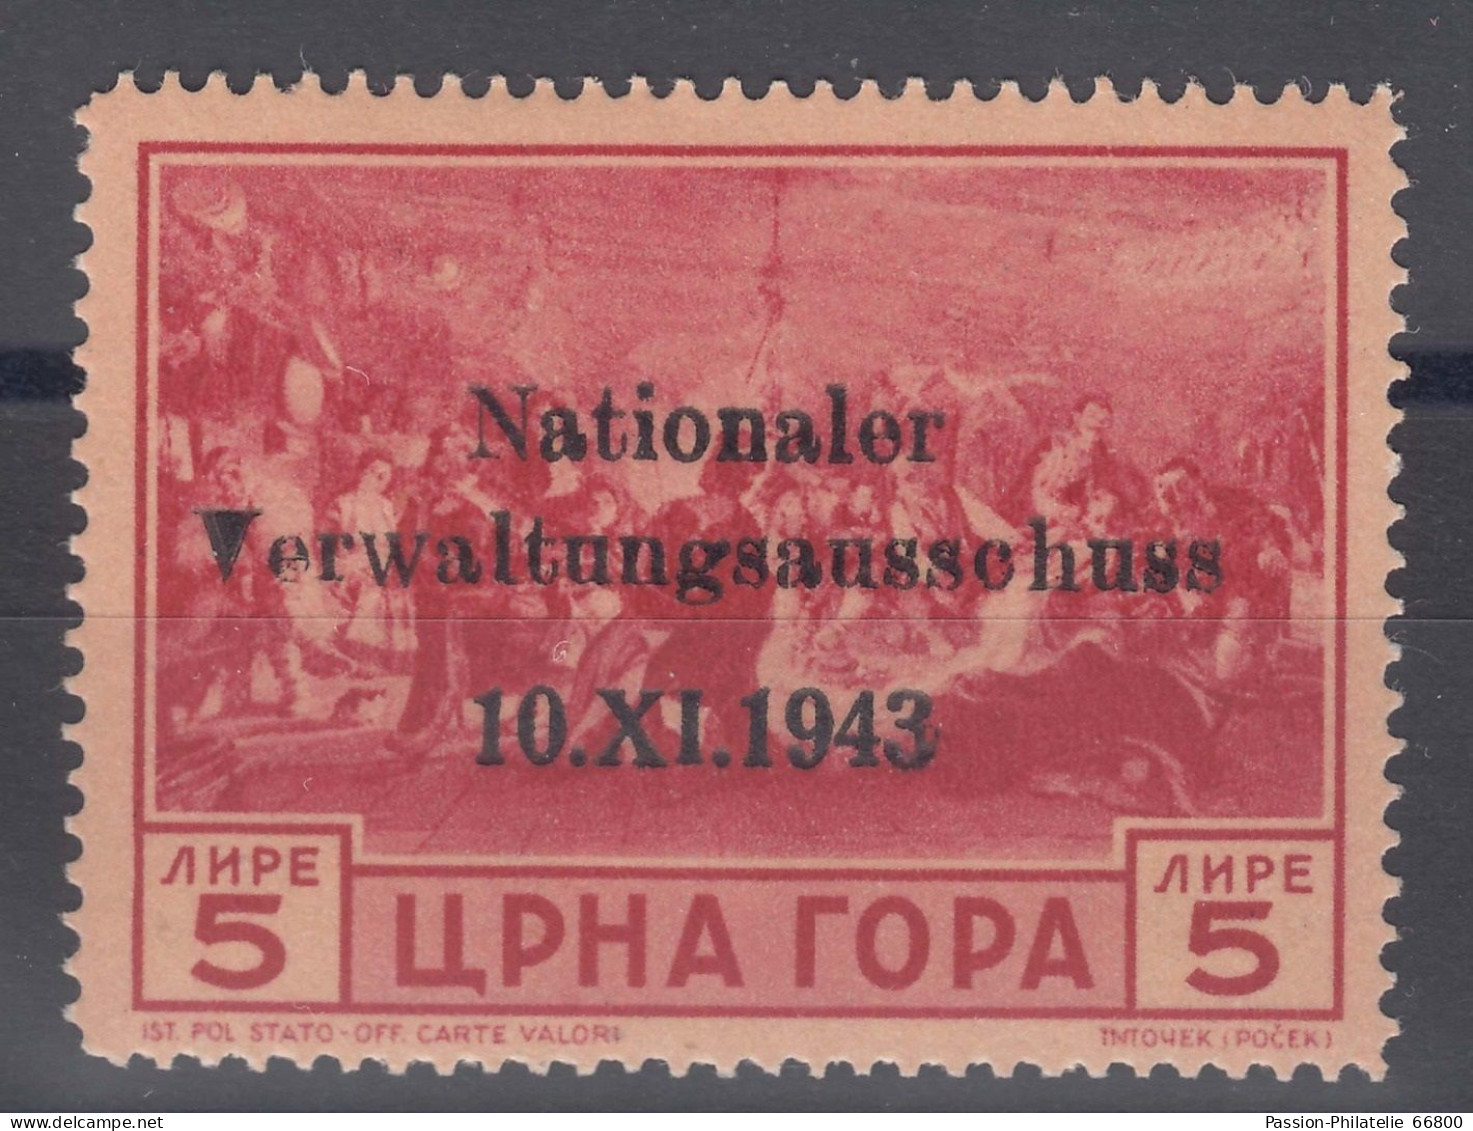 Germany Occupation Of Montenegro In WWII Complete 1943-1944 Mi#1-35 Excellent Never Hinged, Attest On Two Key Stamps - Ocupación 1938 – 45